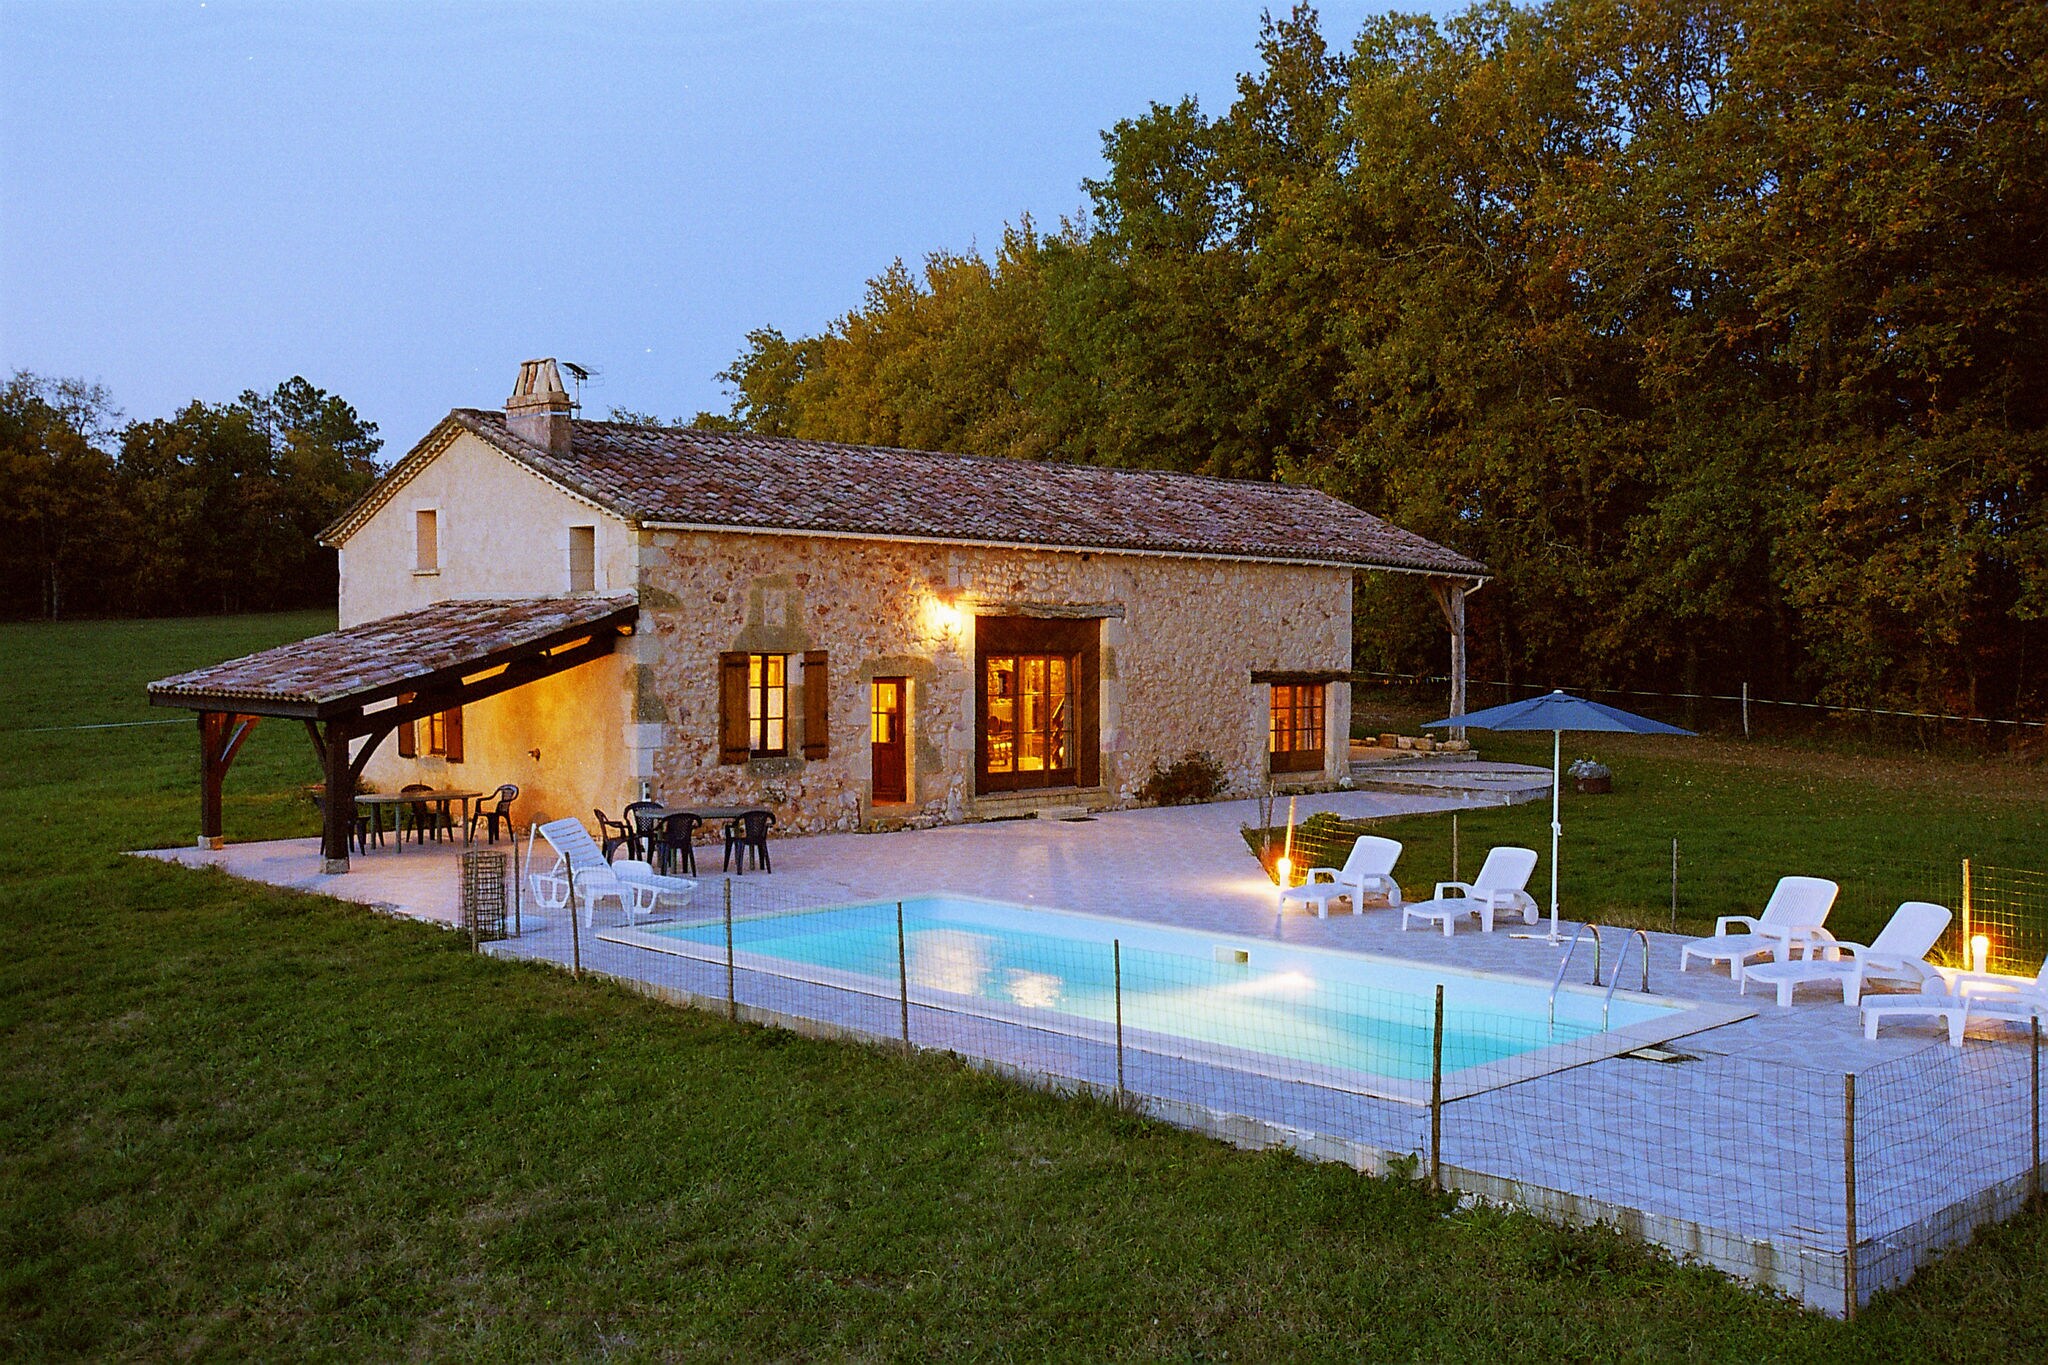 Périgord house with private swimming pool in the middle of unspoiled nature.